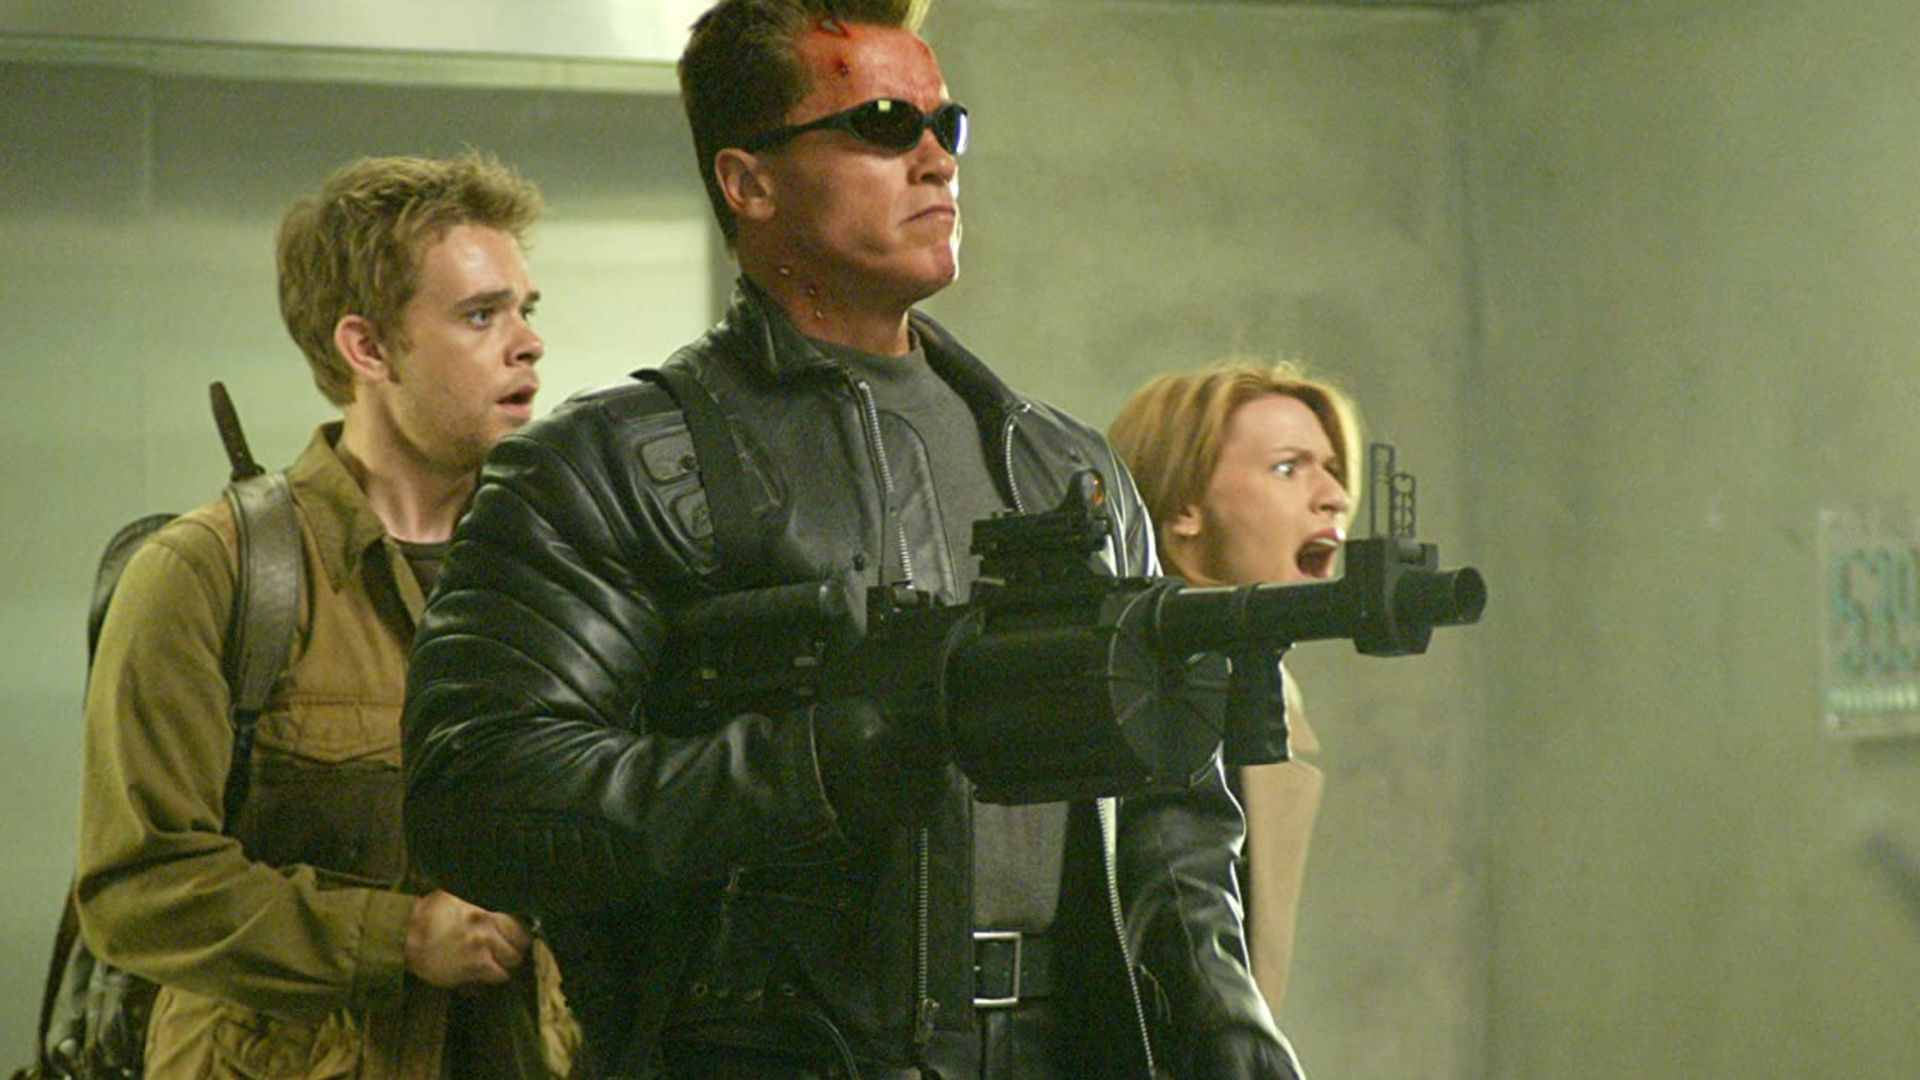 Terminator movie franchise, Ranked list, Best and worst, Sci-fi space adventures, 1920x1080 Full HD Desktop